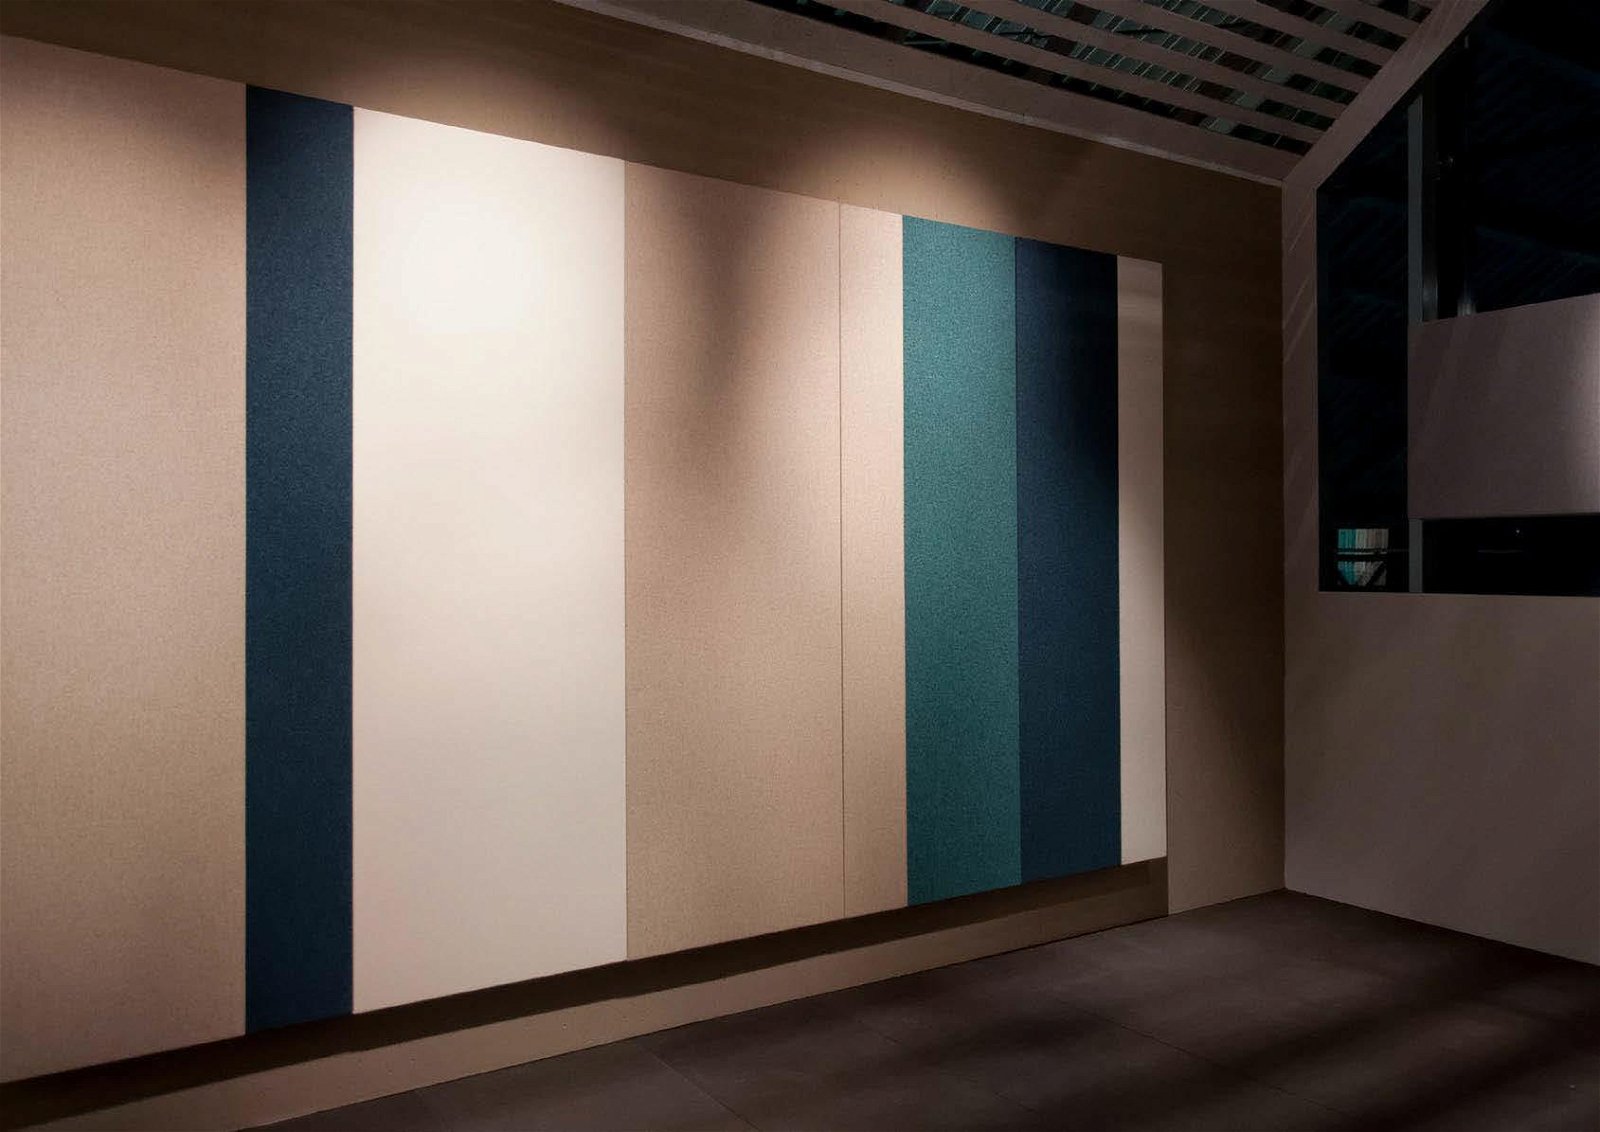 Uispair Modern Wool Acoustic Panel in Sound Absorption Insulation Material for O 5